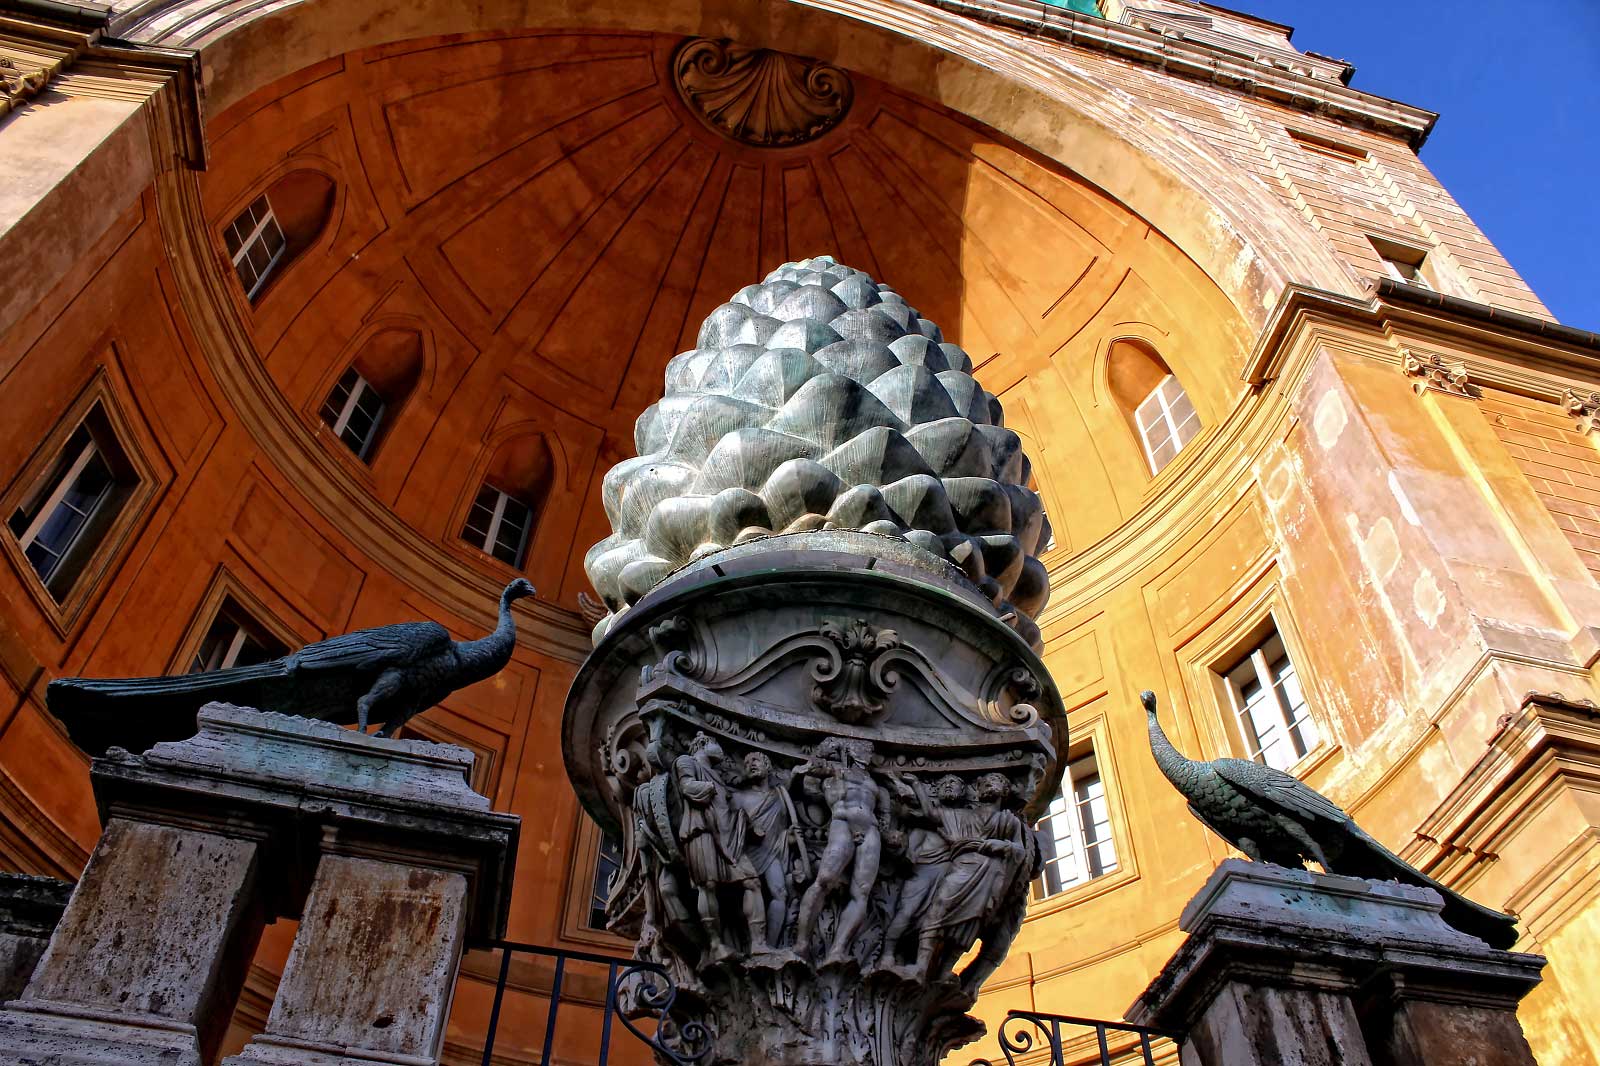 Visit the Pinecone Courtyard the lovely little oasis outside the Vatican Museums is where you will find the symbolic ancient structure it is named after.